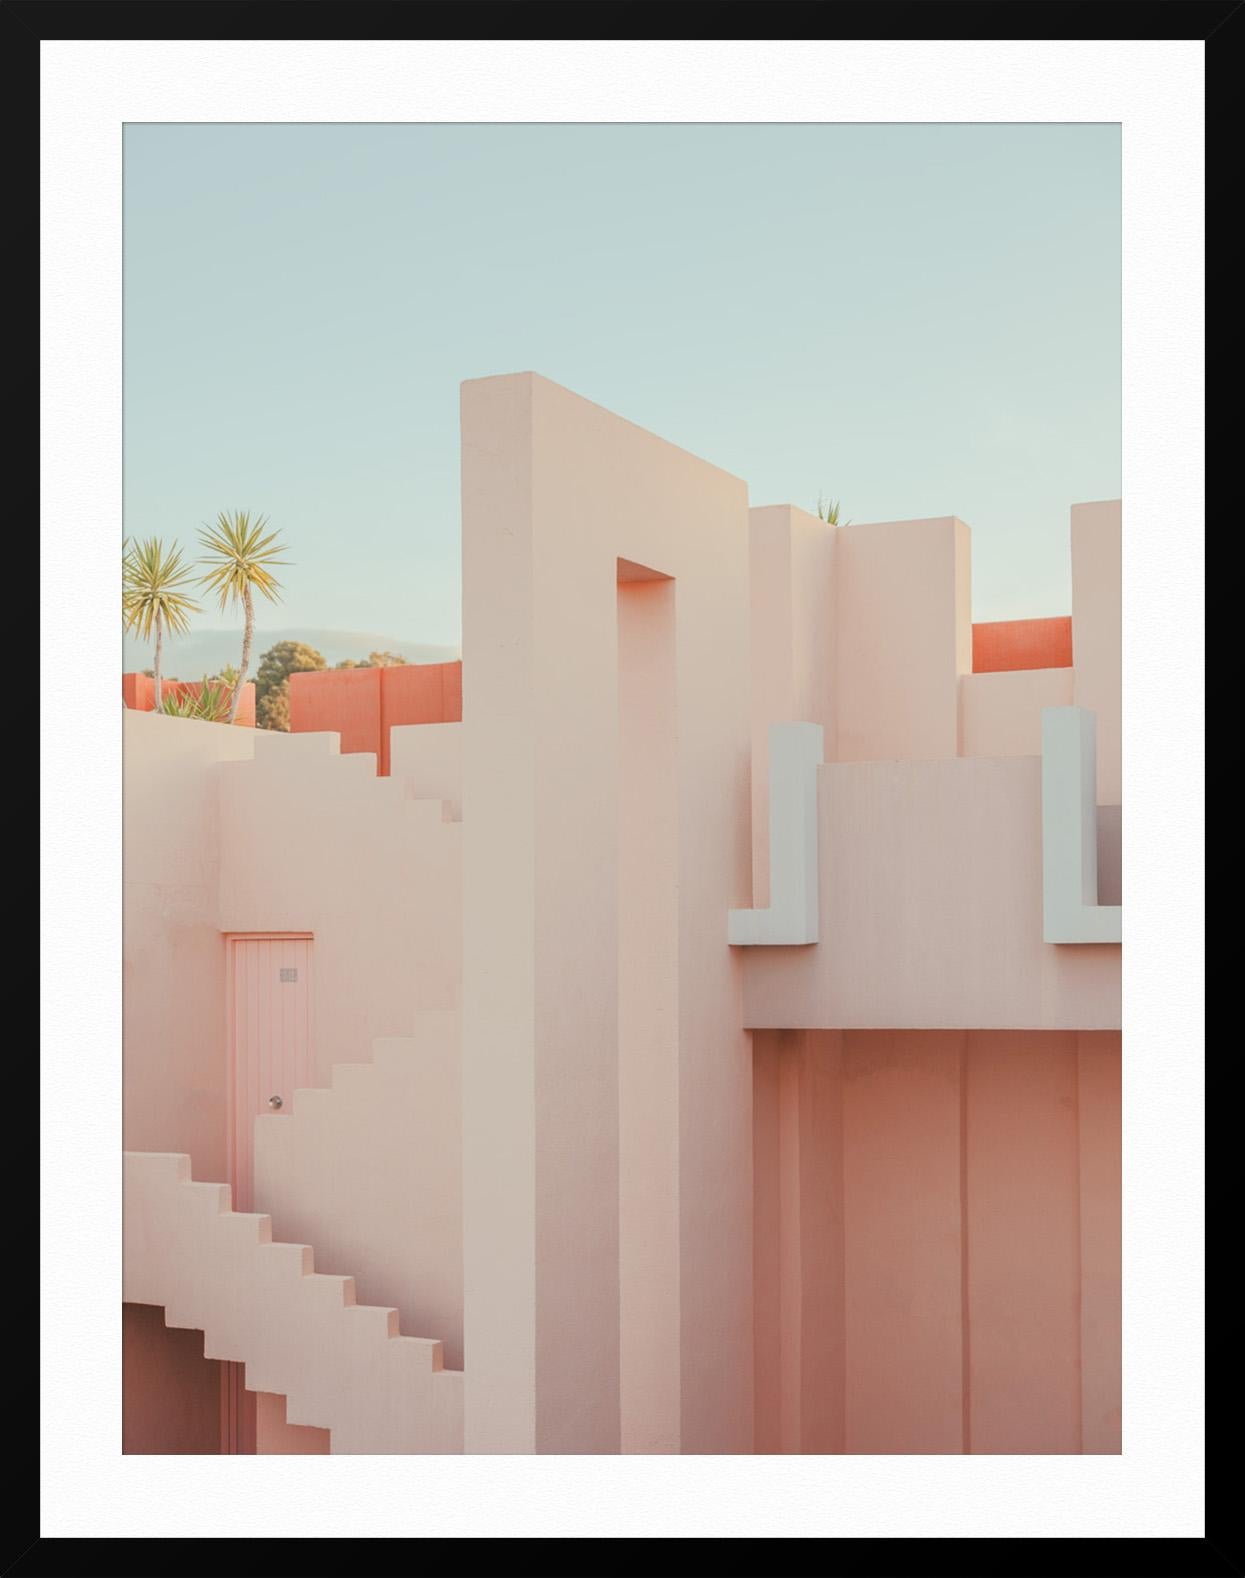 ABOUT THIS PIECE: French photographer Ludwig Favre recently visited La Muralla Roja in Calpe, Spain. His pictures of architecture carry the same romantic feel of a Parisian shooting exotic landscapes. Favre is know for his soft Palette, interesting